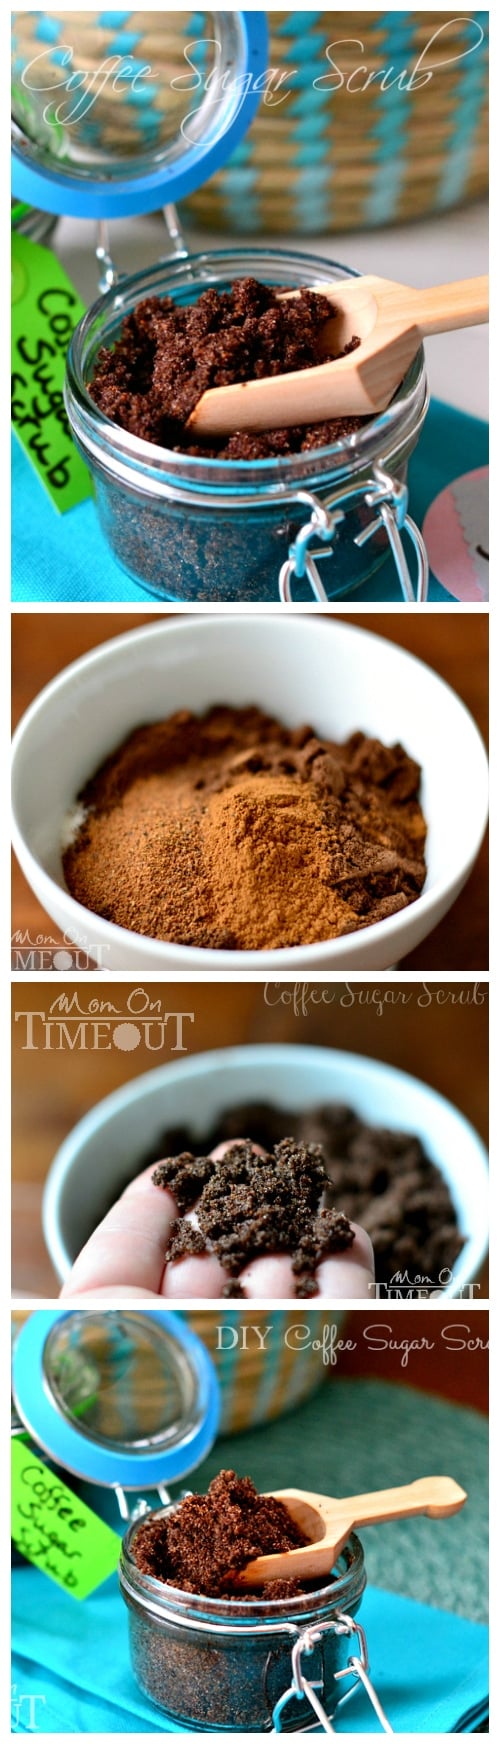 DIY Coffee Sugar Scrub | MomOnTimeout.com Make your own deliciously fragrant scrub at home!  Wonderful for exfoliation and can be made with ingredients you already have on hand! #diy #gifts